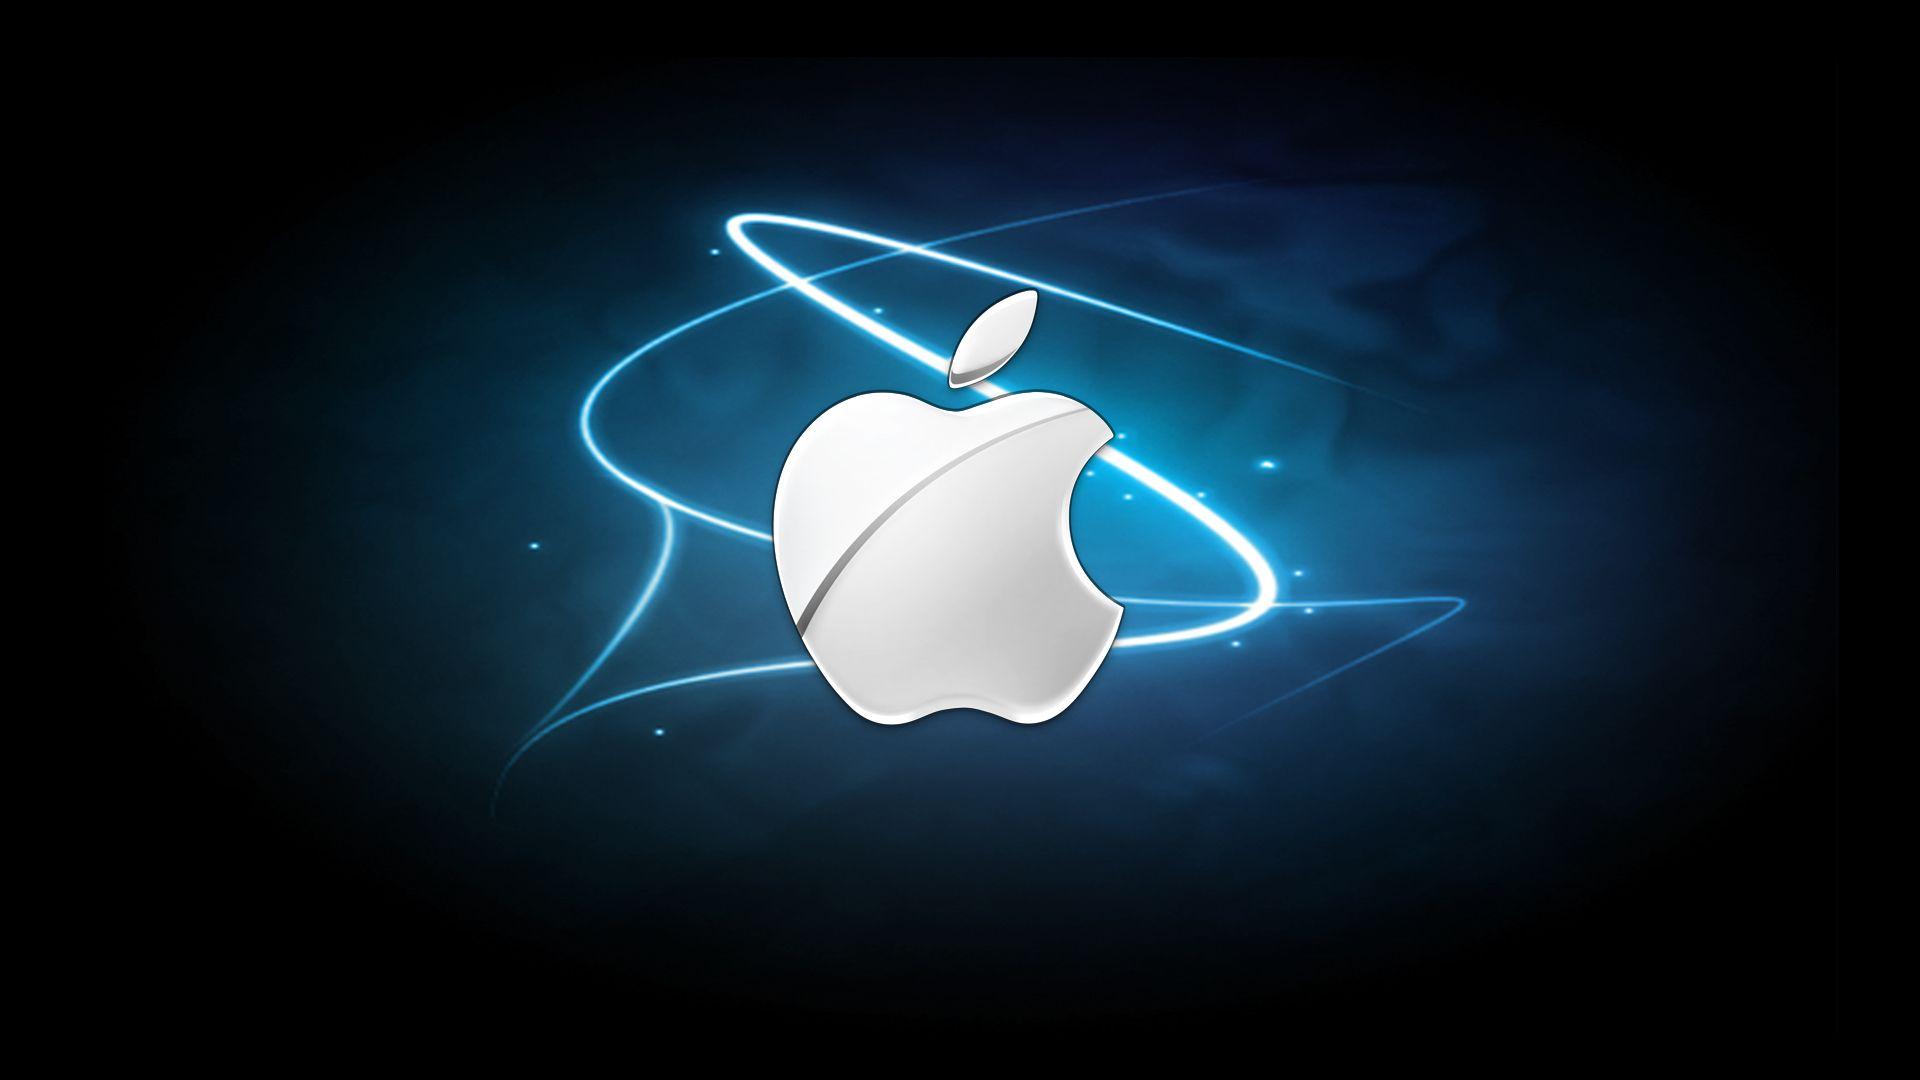 Official Apple Logo - Official Apple Logo HD Wallpaper, Background Image